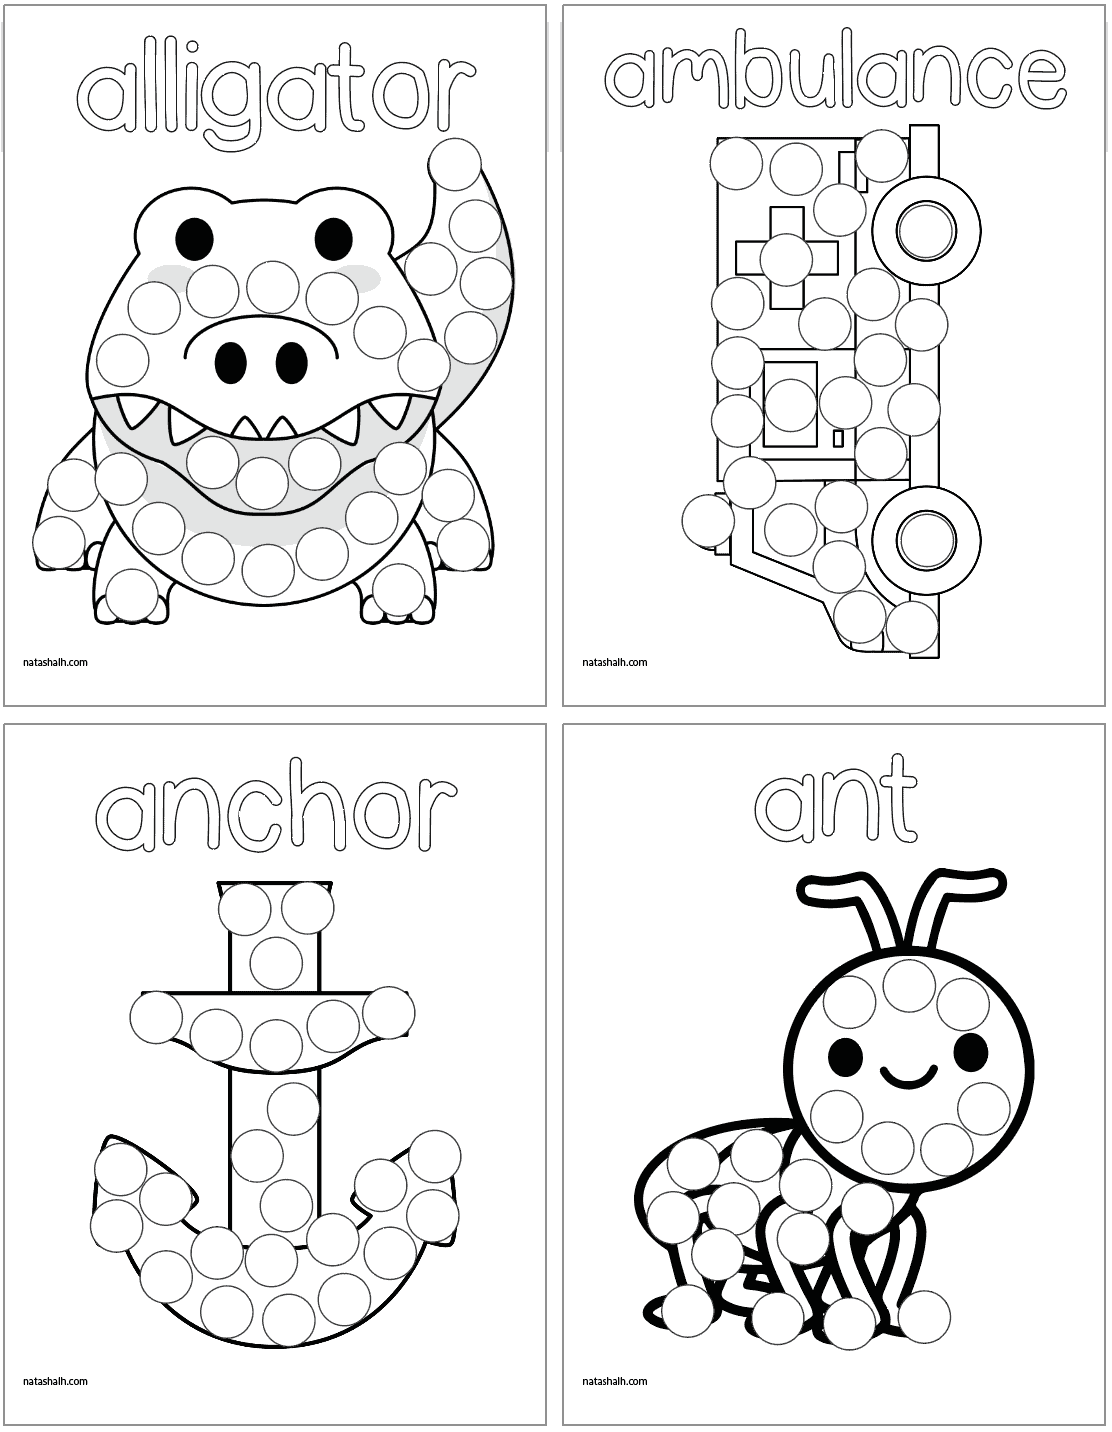 Four letter A dot marker pages. Images include: alligator, ambulance, anchor, and ant